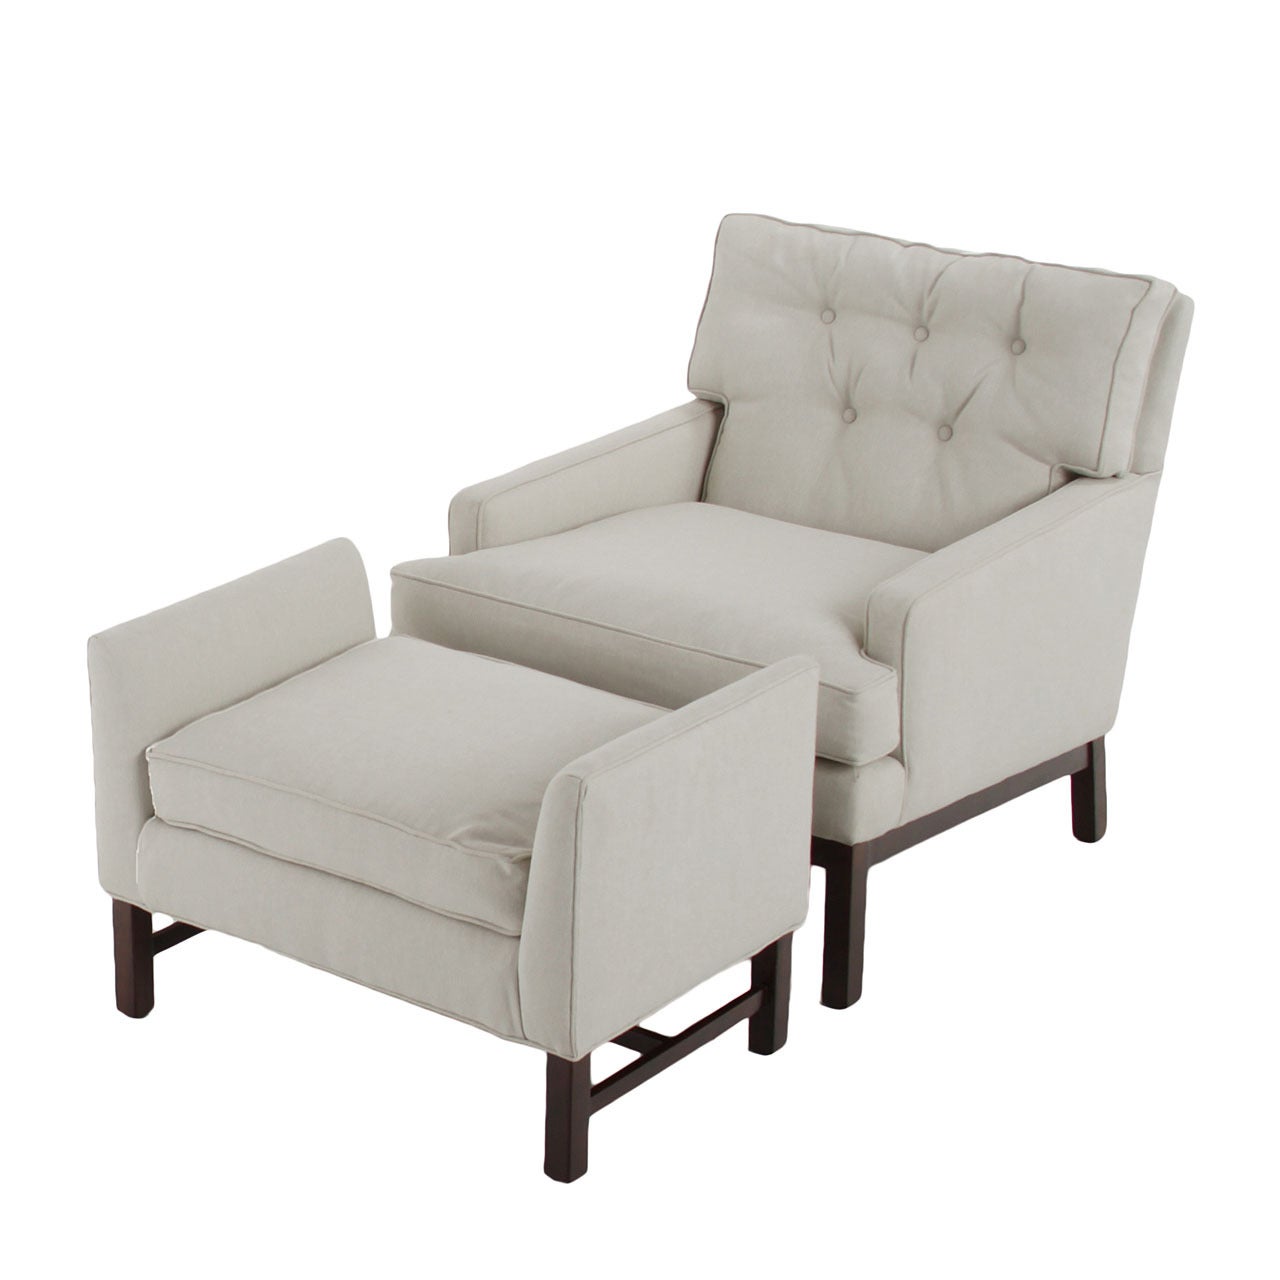 Lounge Chair and Ottoman For Sale